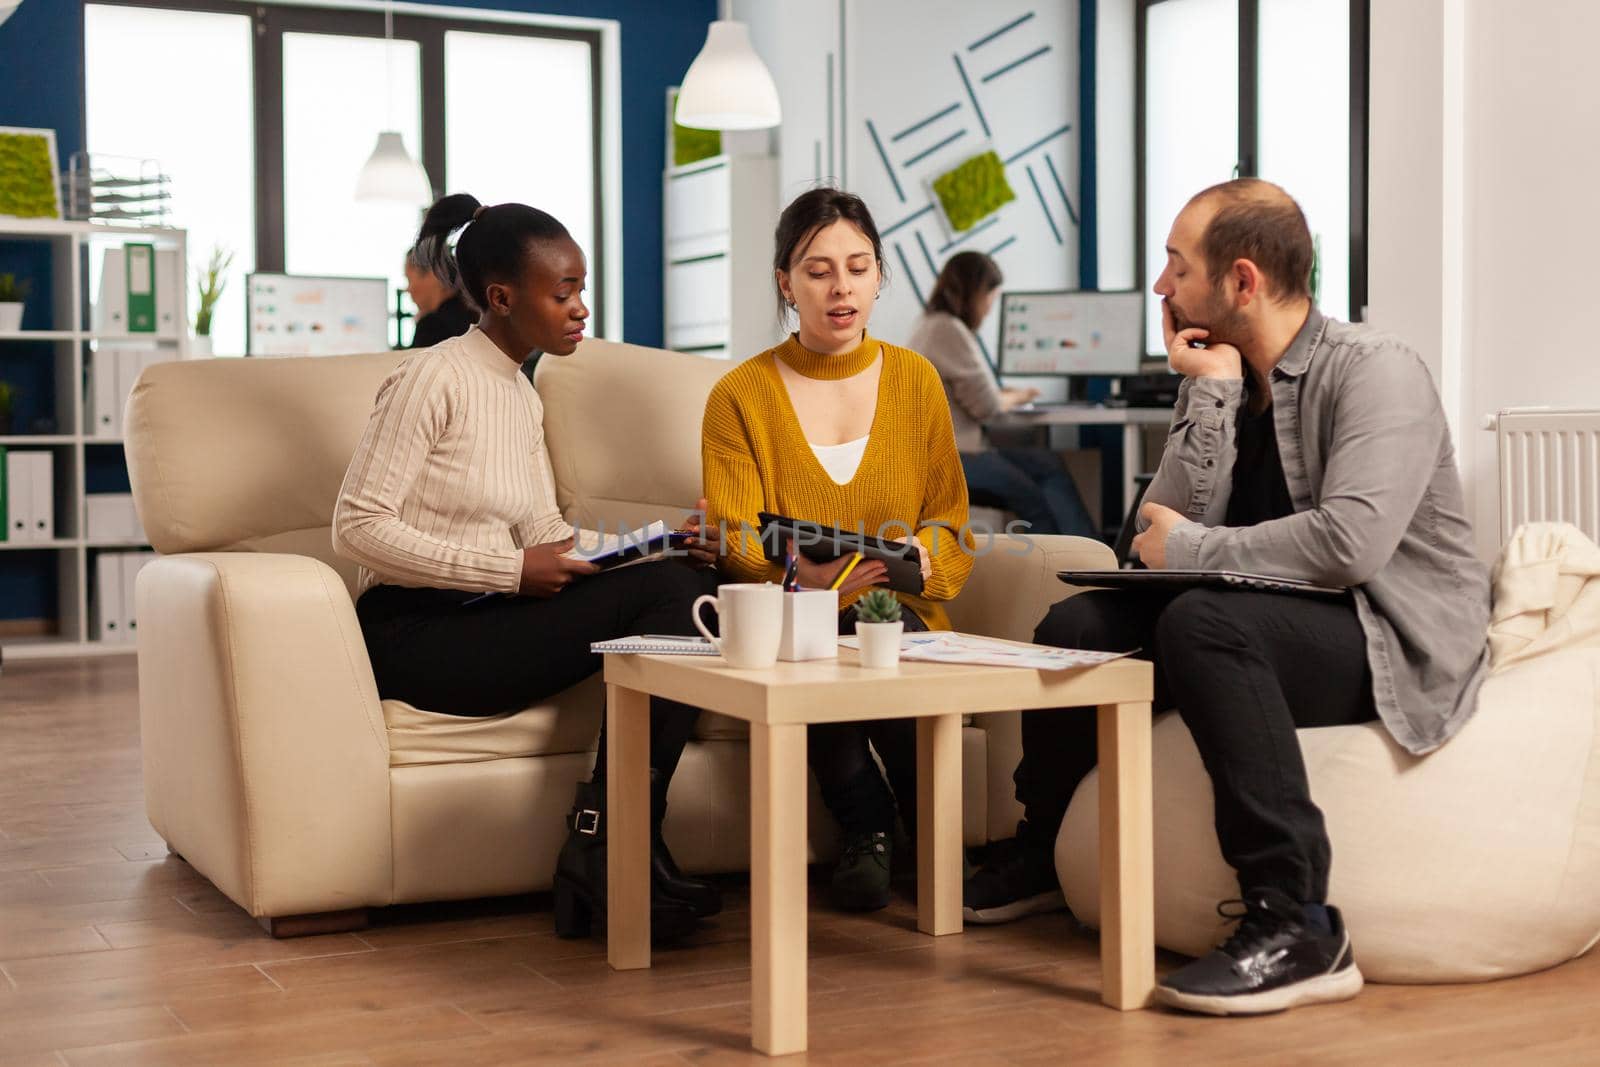 Confident company manager giving working tasks to diverse teammates sitting on couch in start up office. Multiethnic team discussing project ideas at brainstorming meeting using digital devices